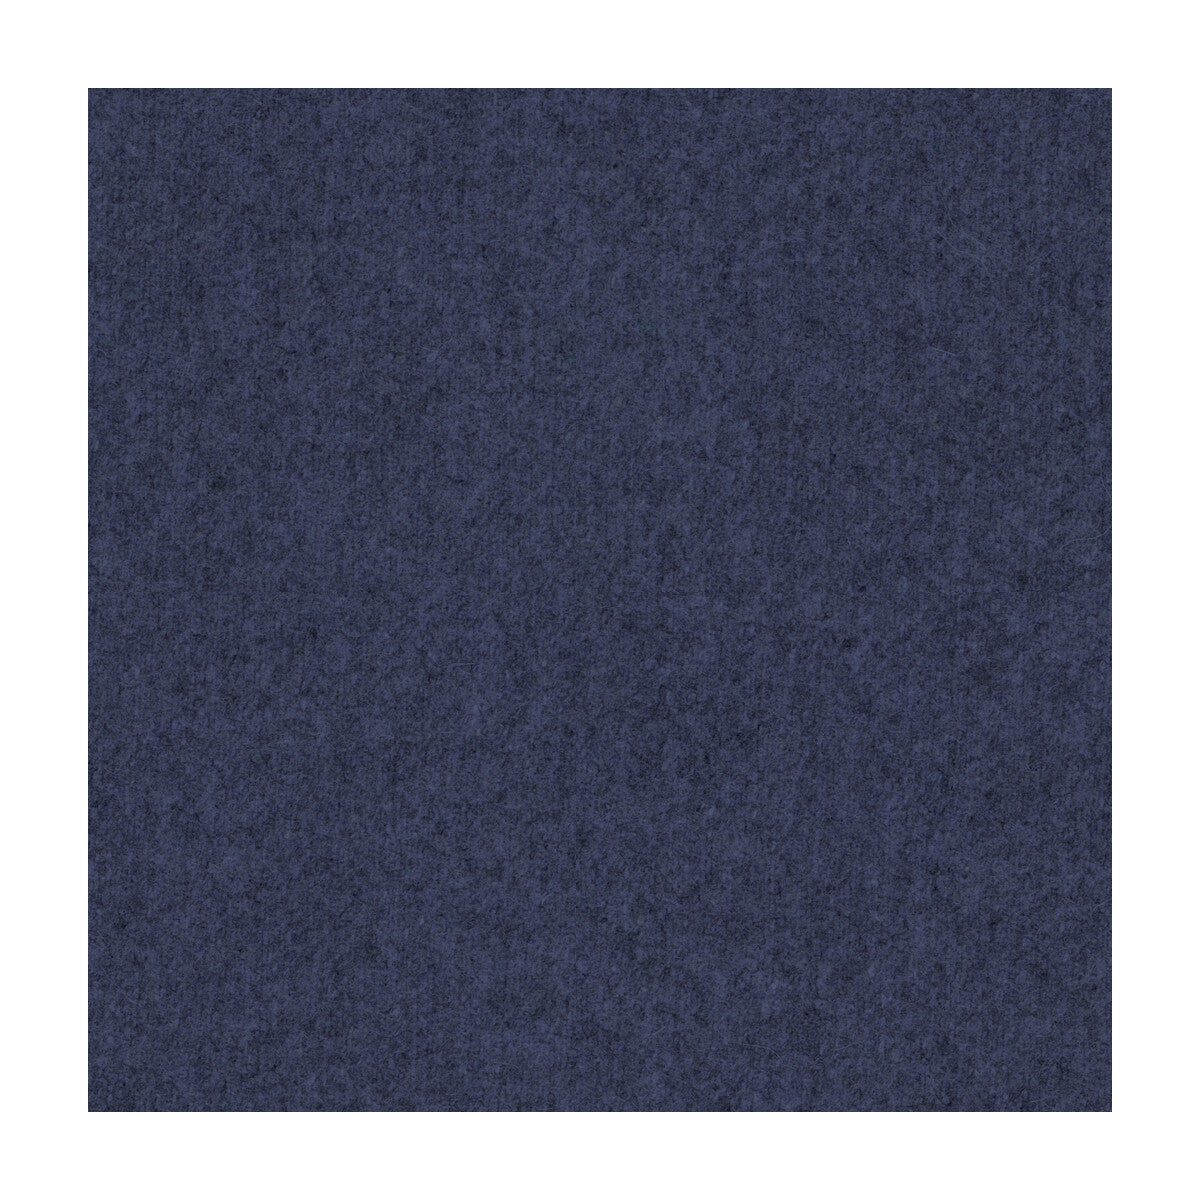 Jefferson Wool fabric in blueberry color - pattern 34397.5.0 - by Kravet Contract